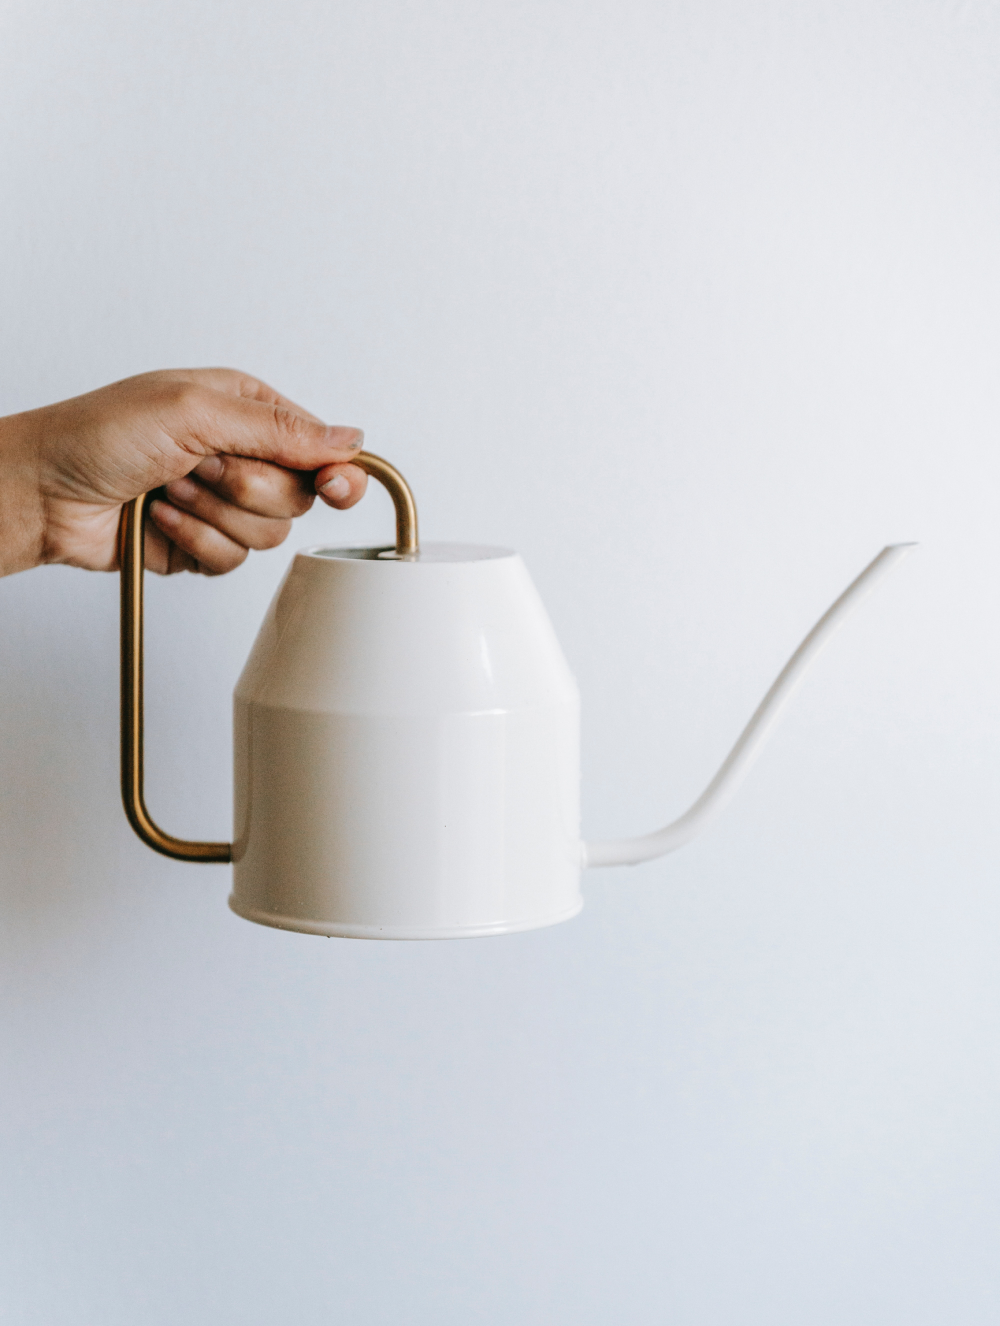 Hand holding a white watering can